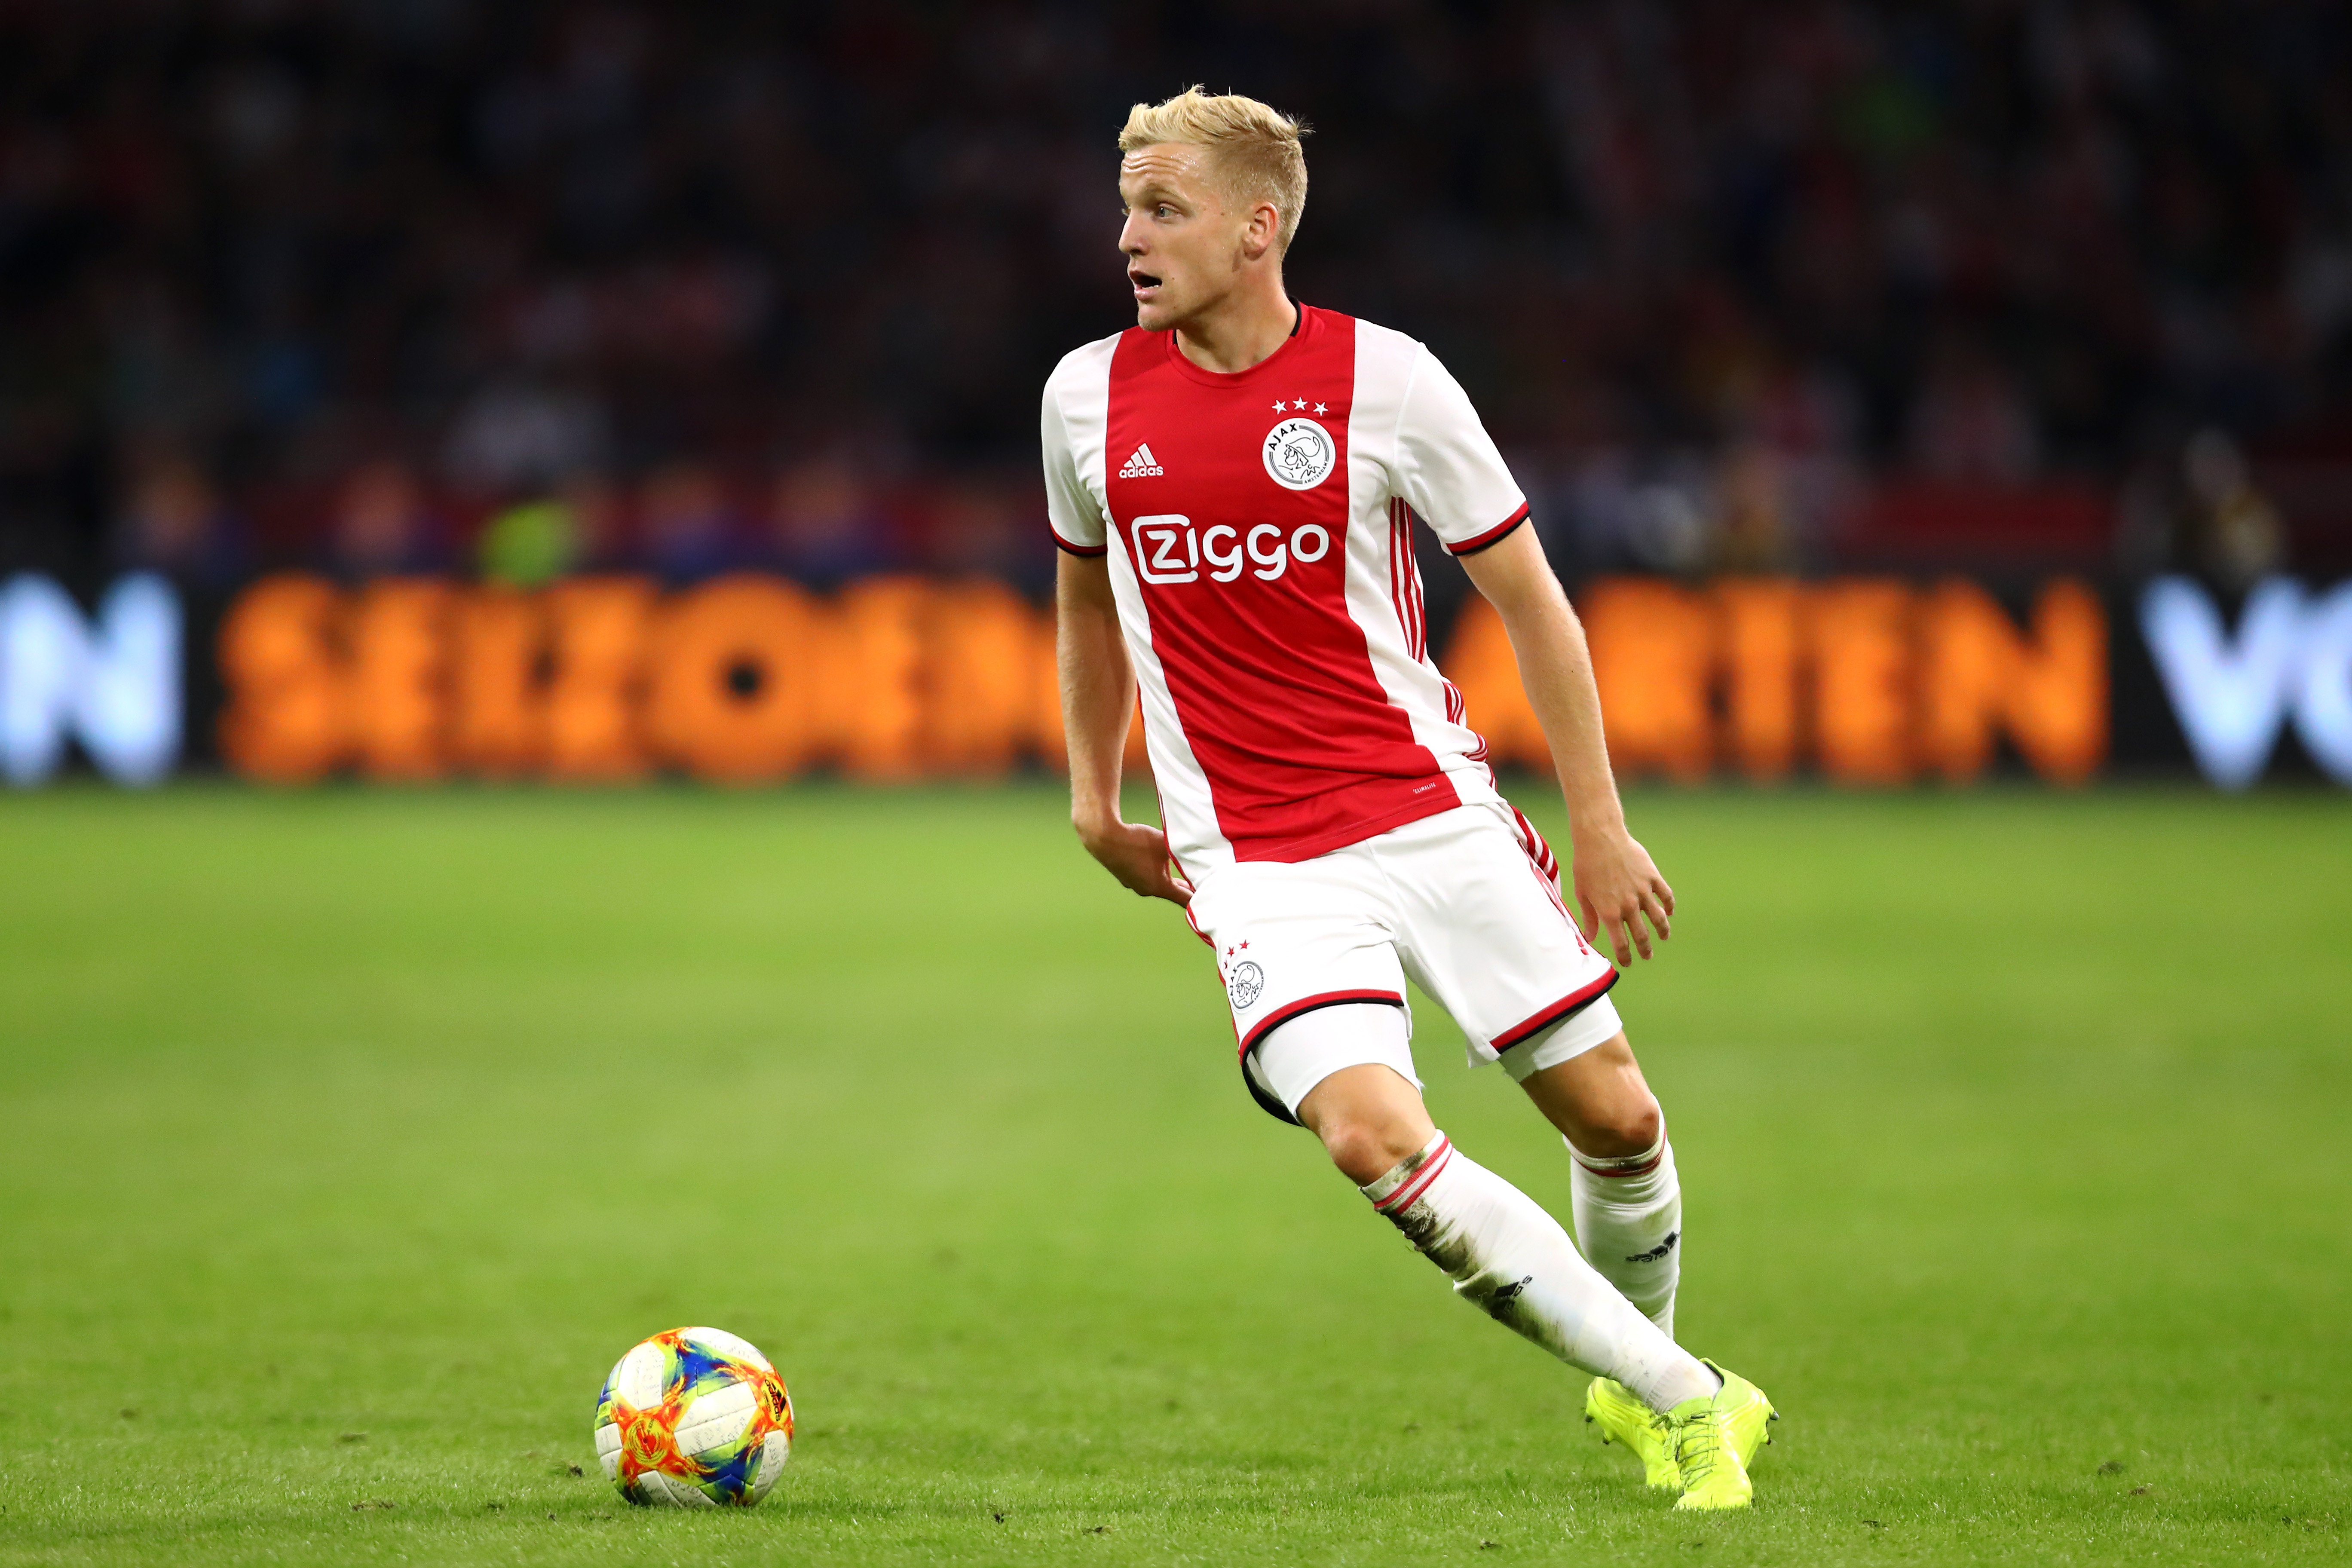 Van de Beek set for a return to Ajax? (Photo by Dean Mouhtaropoulos/Getty Images)